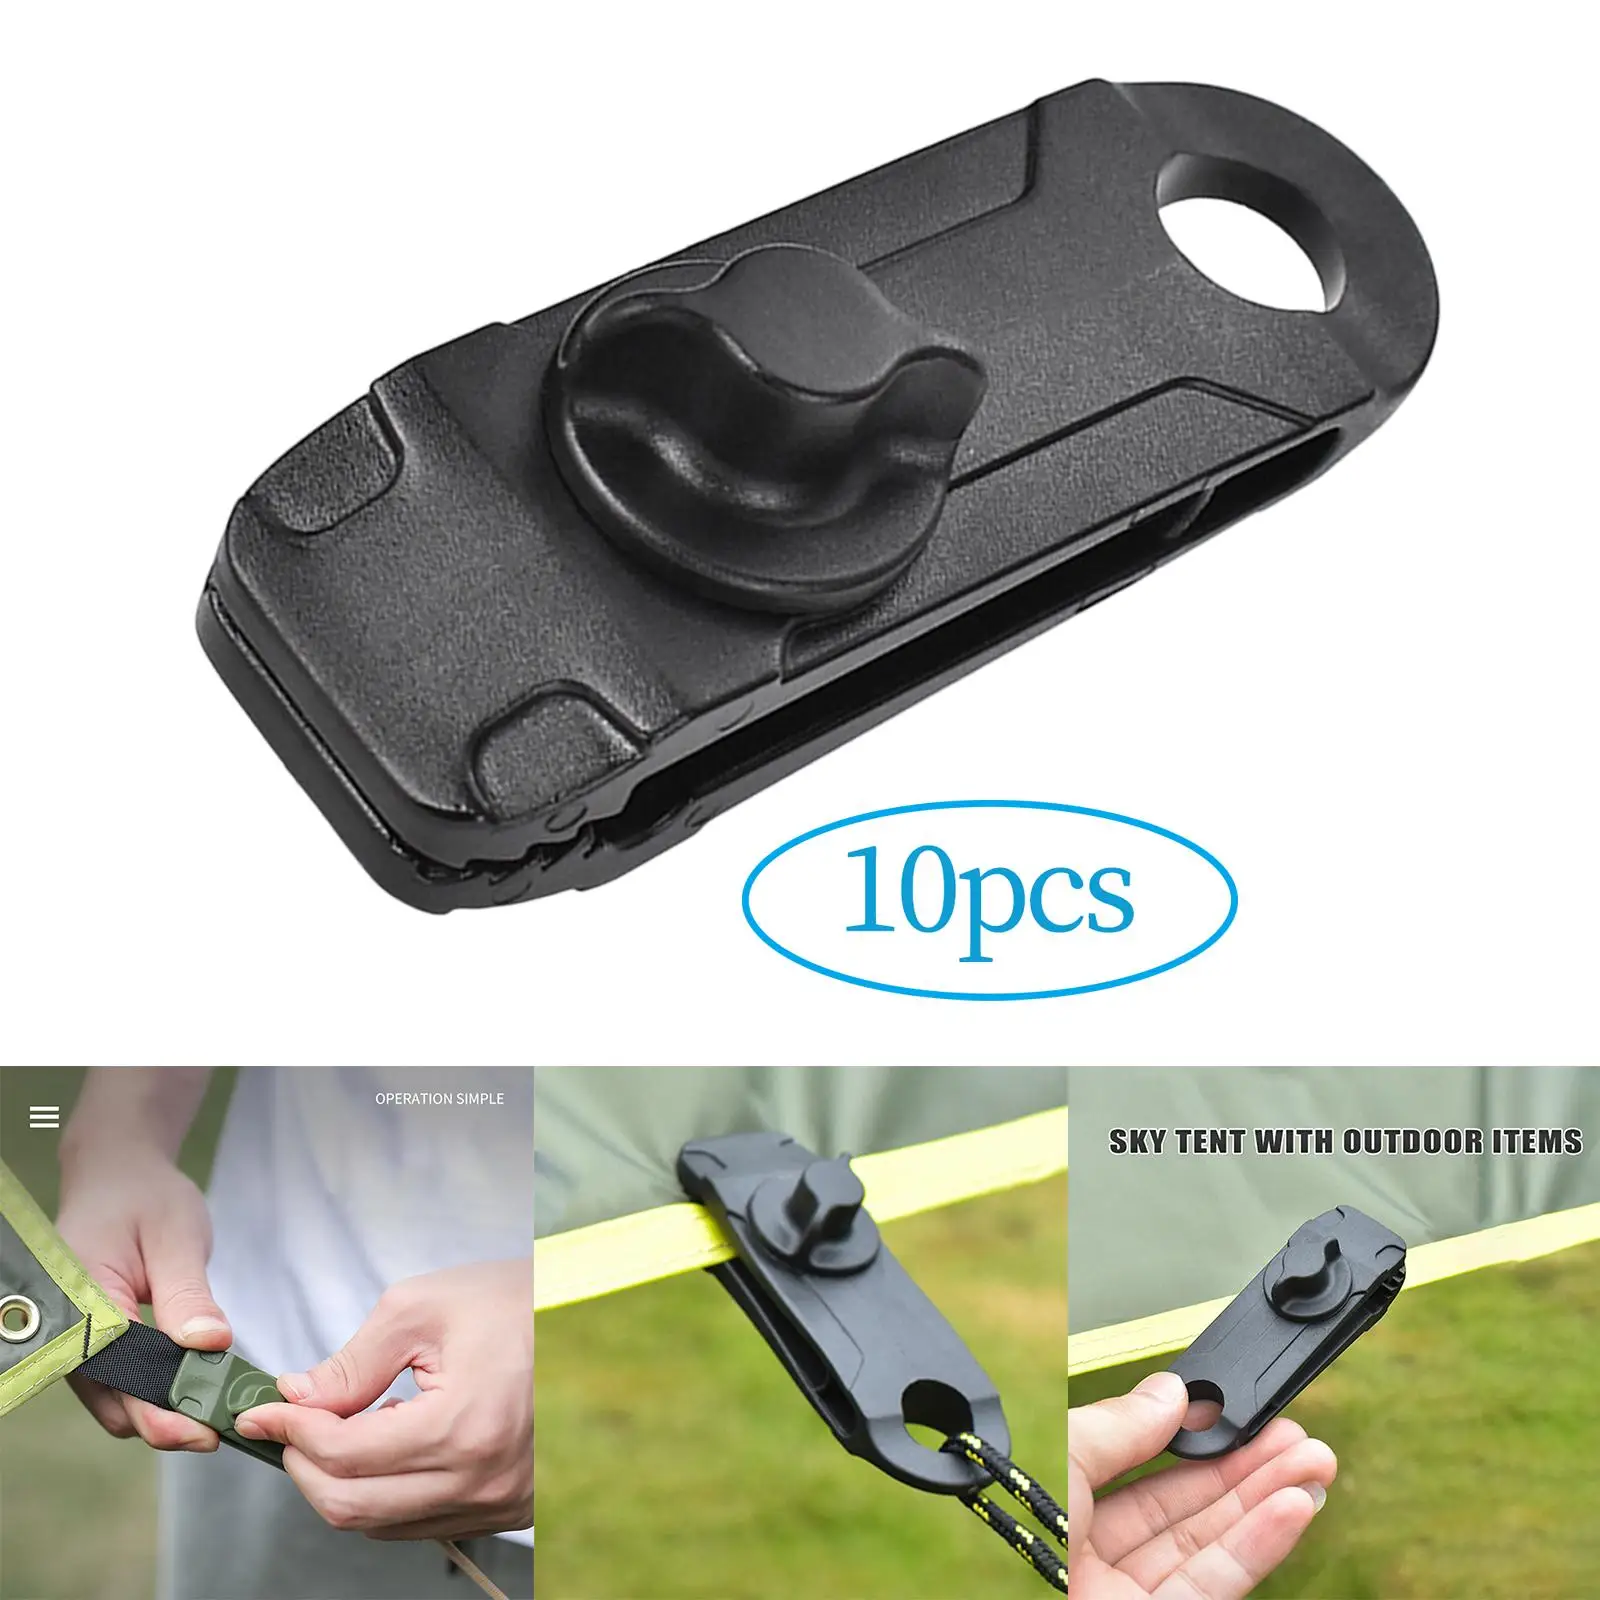 10 Pieces Reusable Tent Canopy Cloth Clips Adjustable Accessories Buckle Tool Black for Boat Cover Car Covers Projector Screen